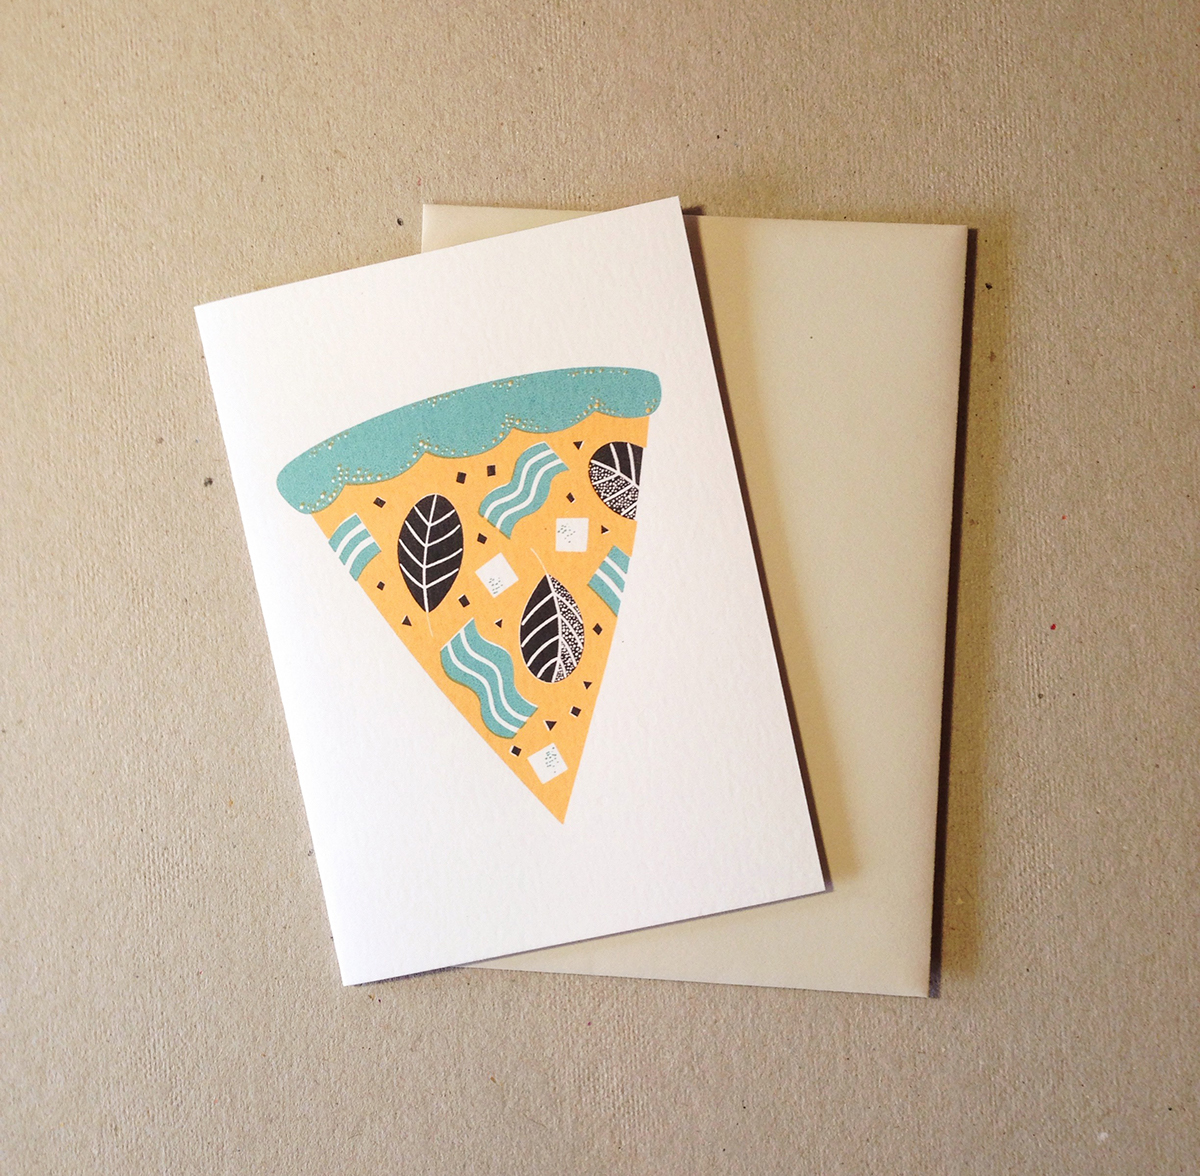 Pizza Vegetarian pepperoni greek paper ink screen print silk screen hand printed colours toppings gift cards envelopes